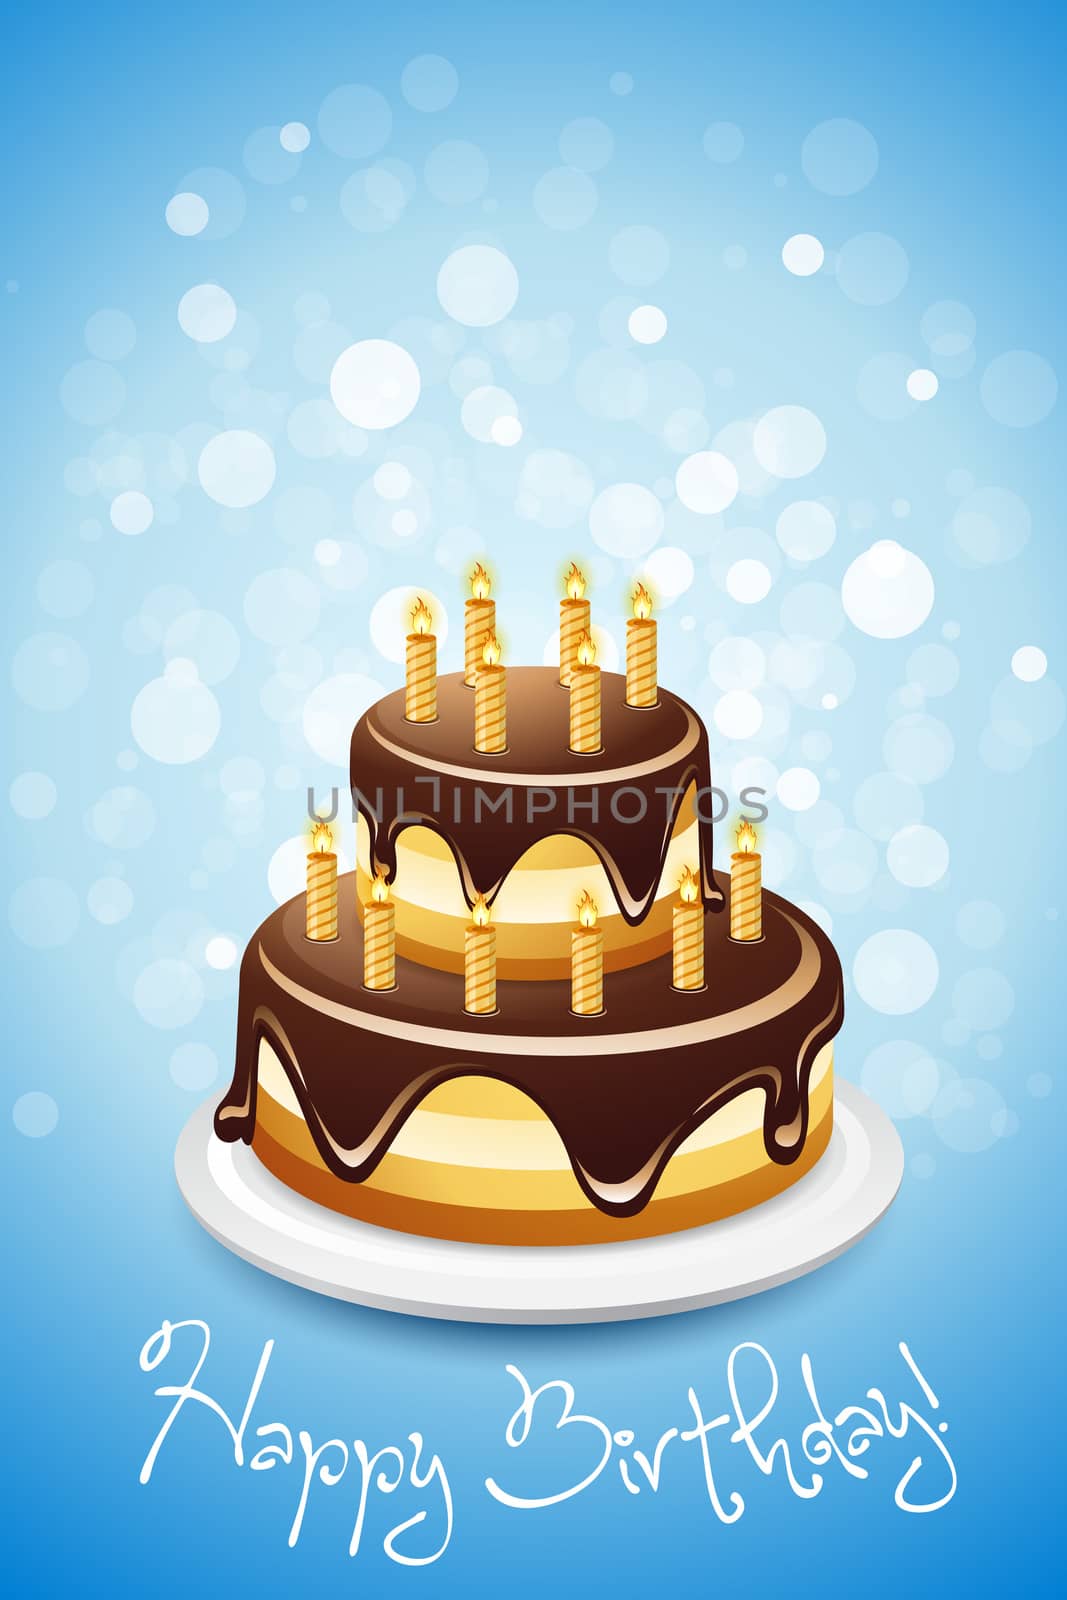 Happy Birthday Card with Cake by WaD